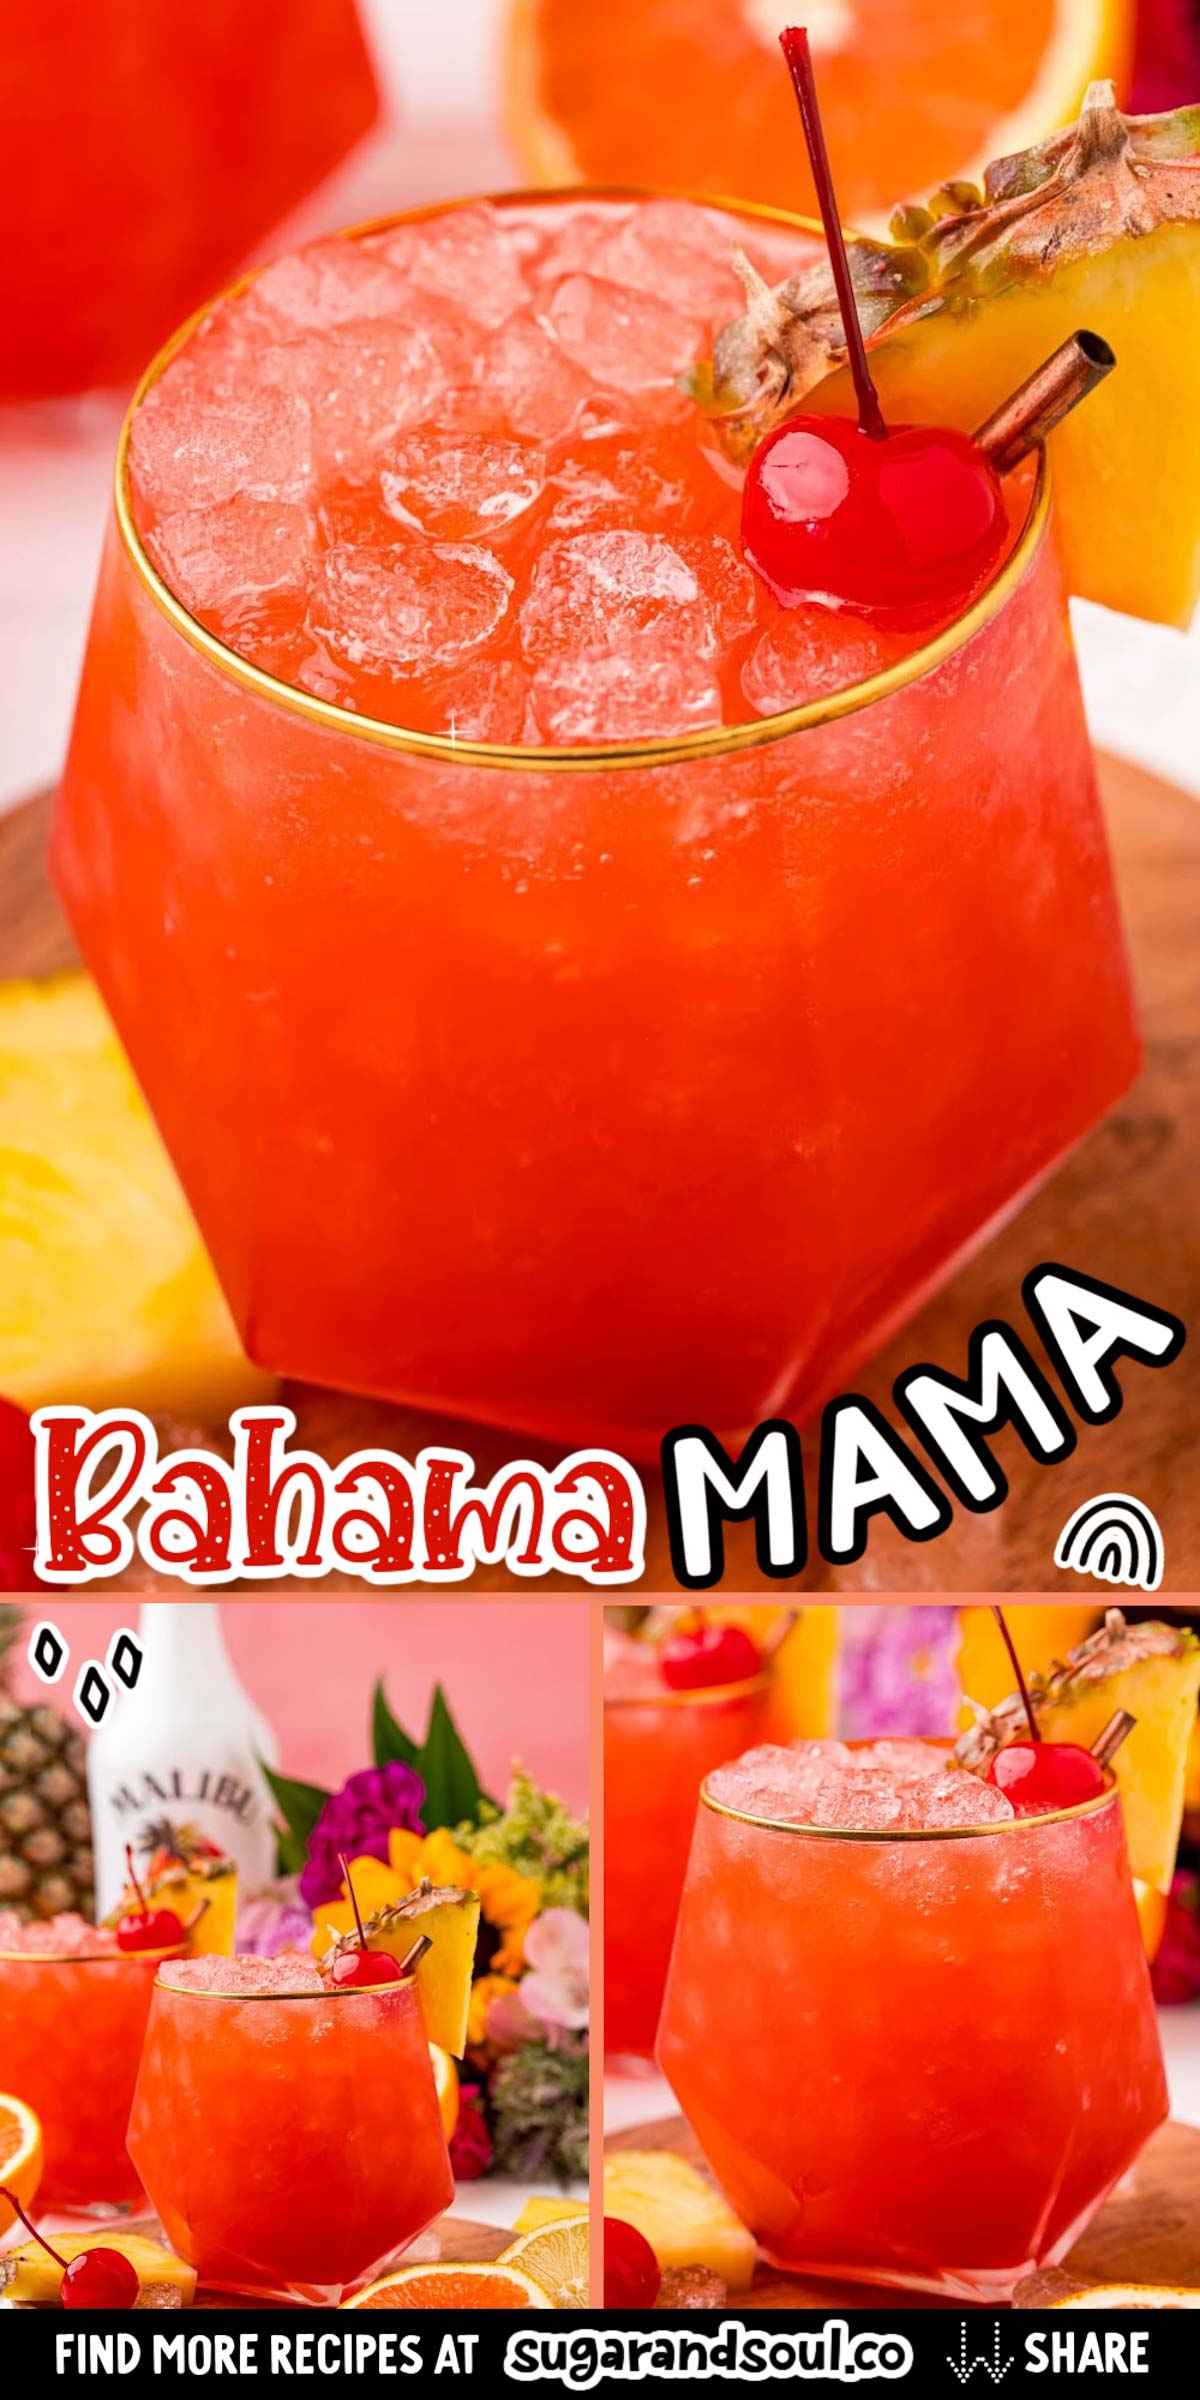 This Bahama Mama Cocktail is overflowing with tropical flavor that will have you dreaming of sunshine, summertime, and your favorite beach! Made with two kinds of rum, orange and pineapple juice, and grenadine for a flavor-packed island cocktail! via @sugarandsoulco